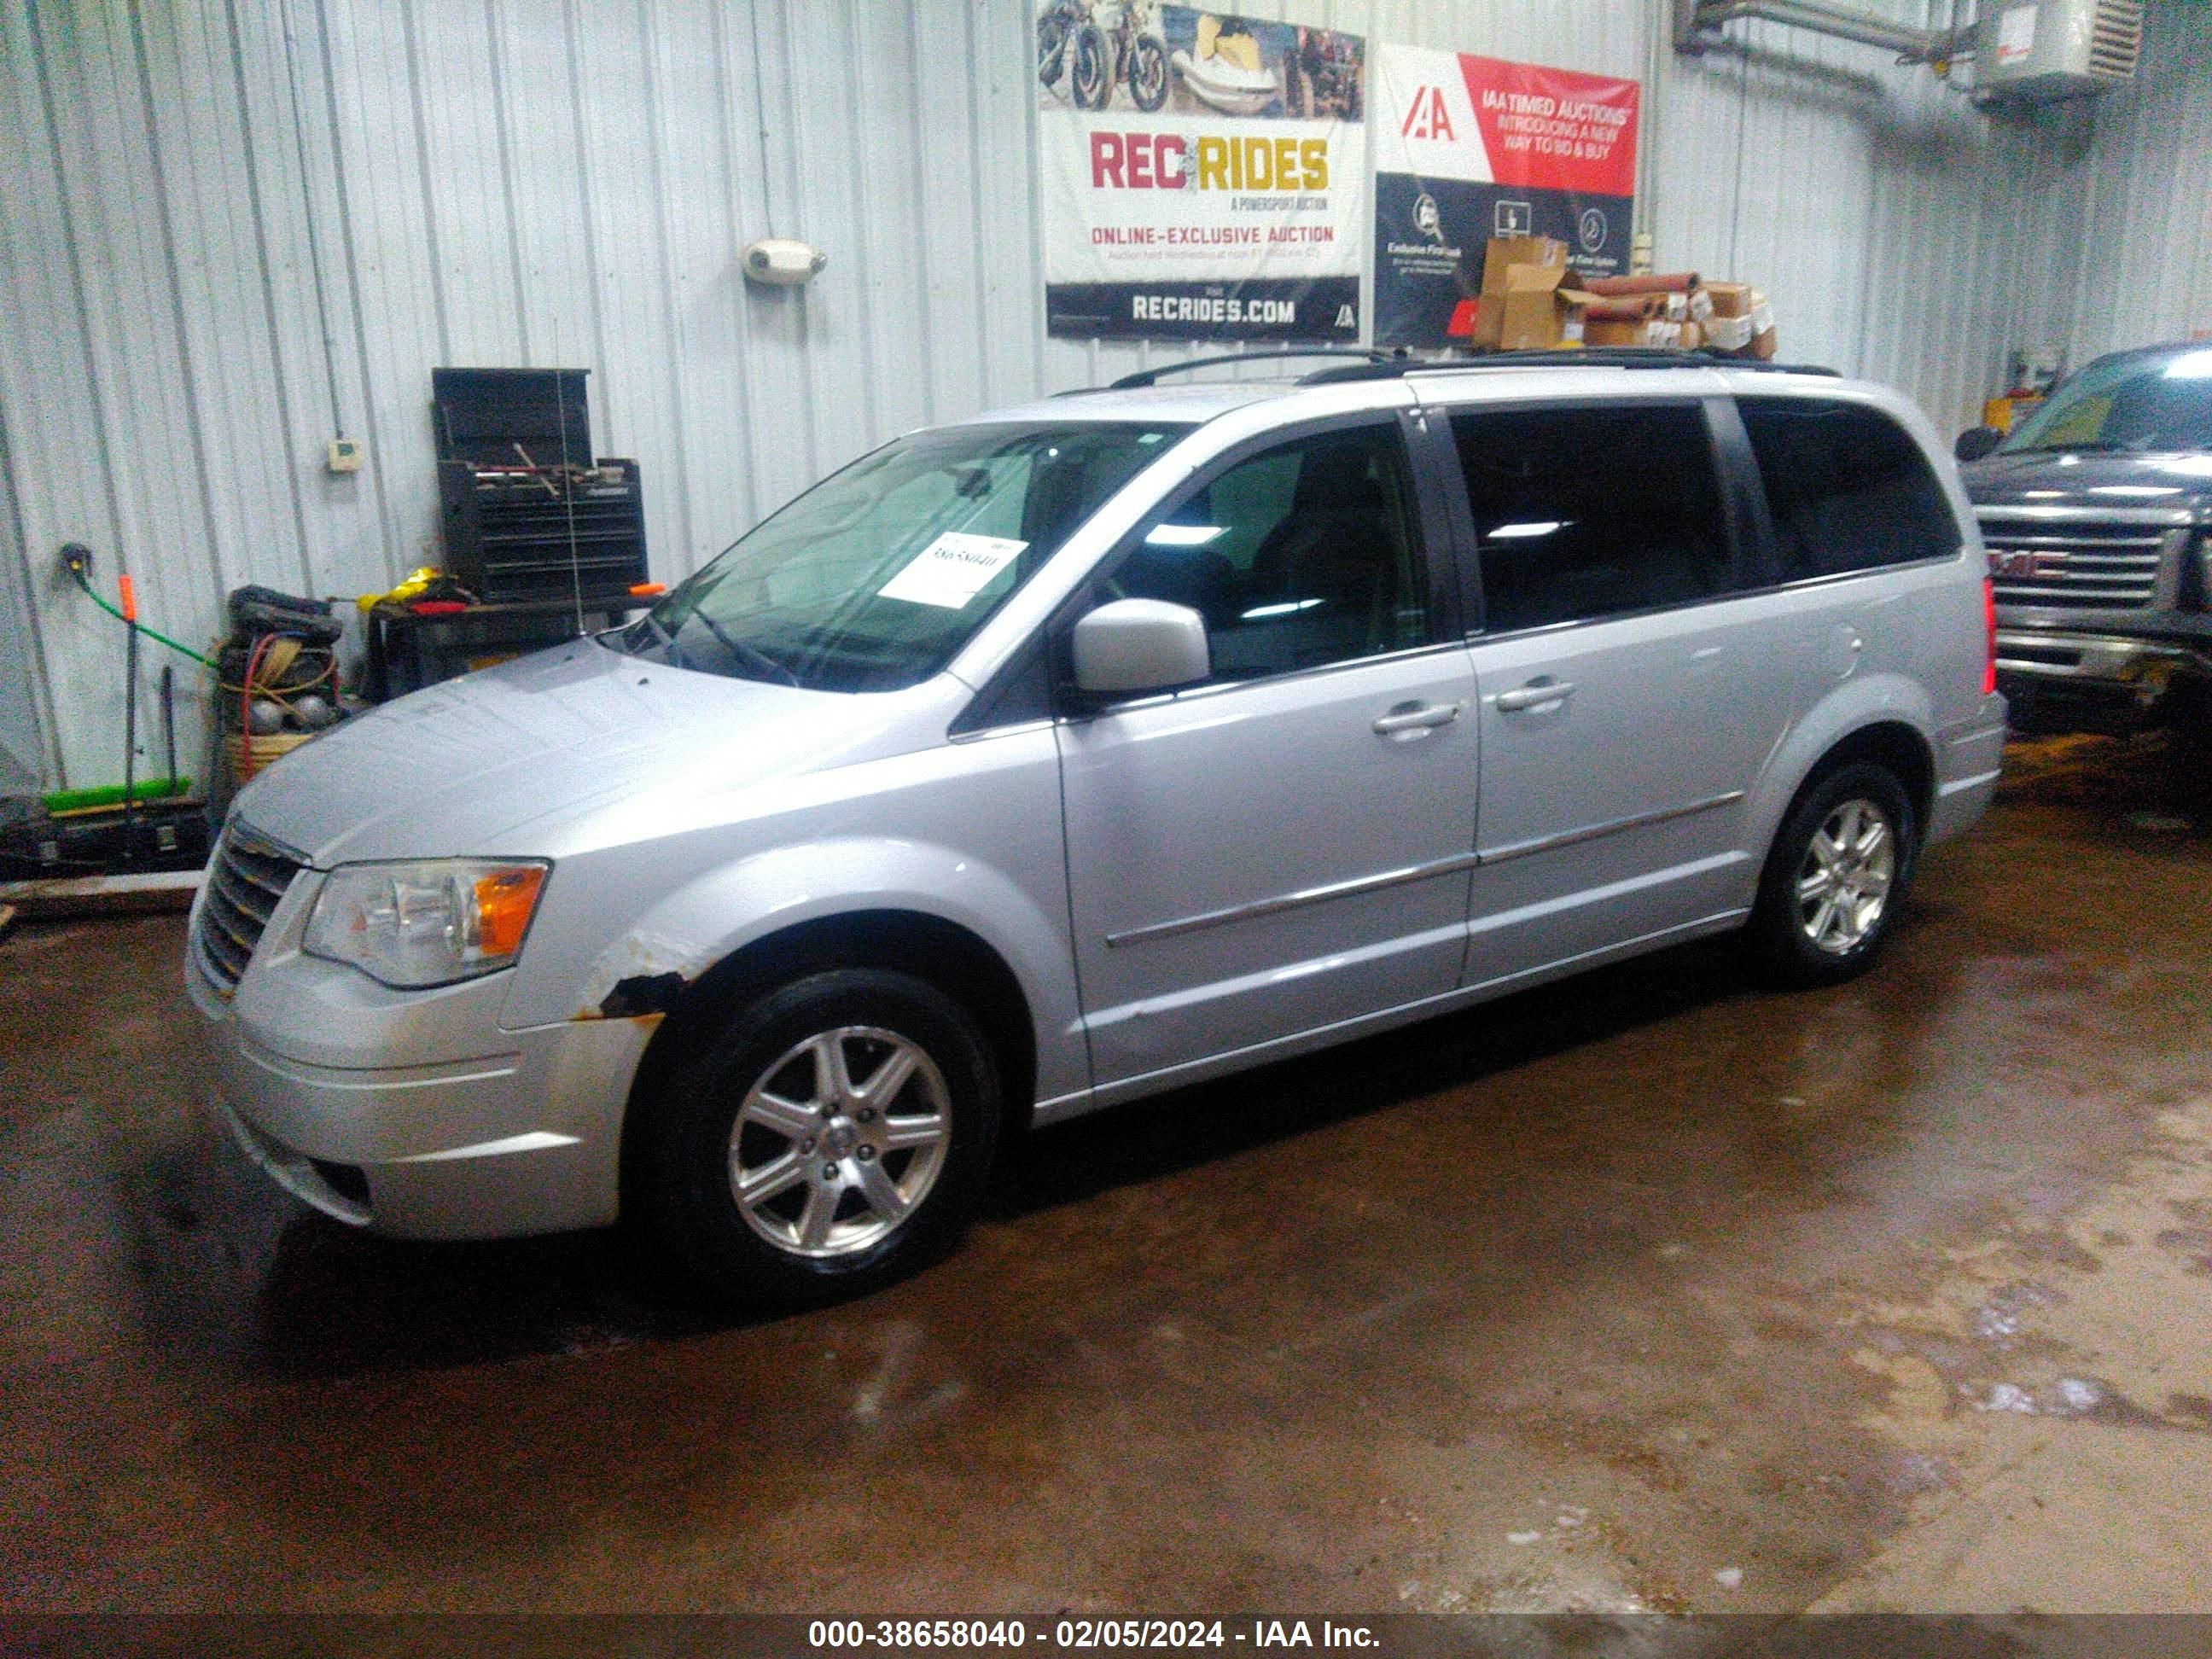 Photo 1 VIN: 2A8HR54109R630671 - CHRYSLER TOWN & COUNTRY 